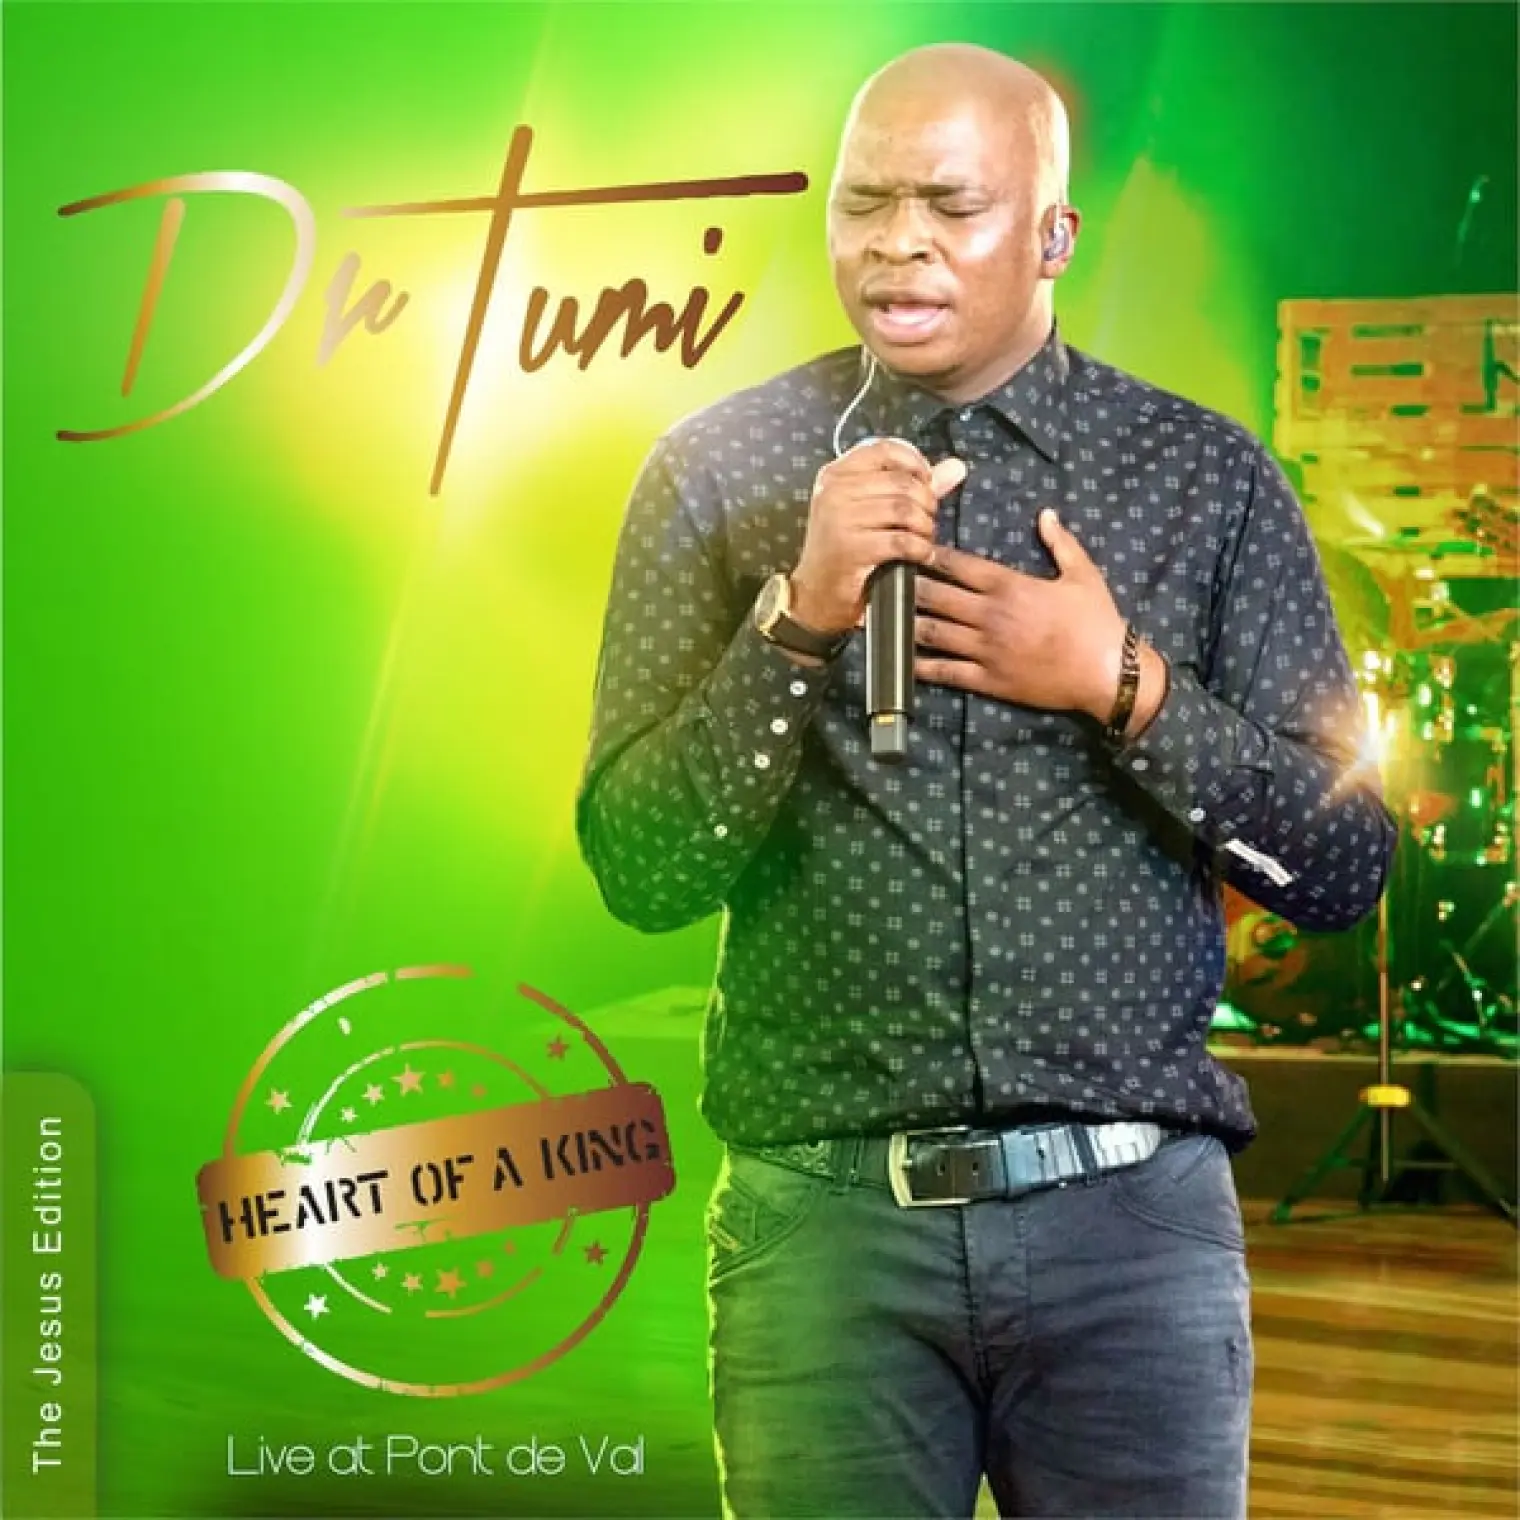 Heart of a King -  Dr Tumi 